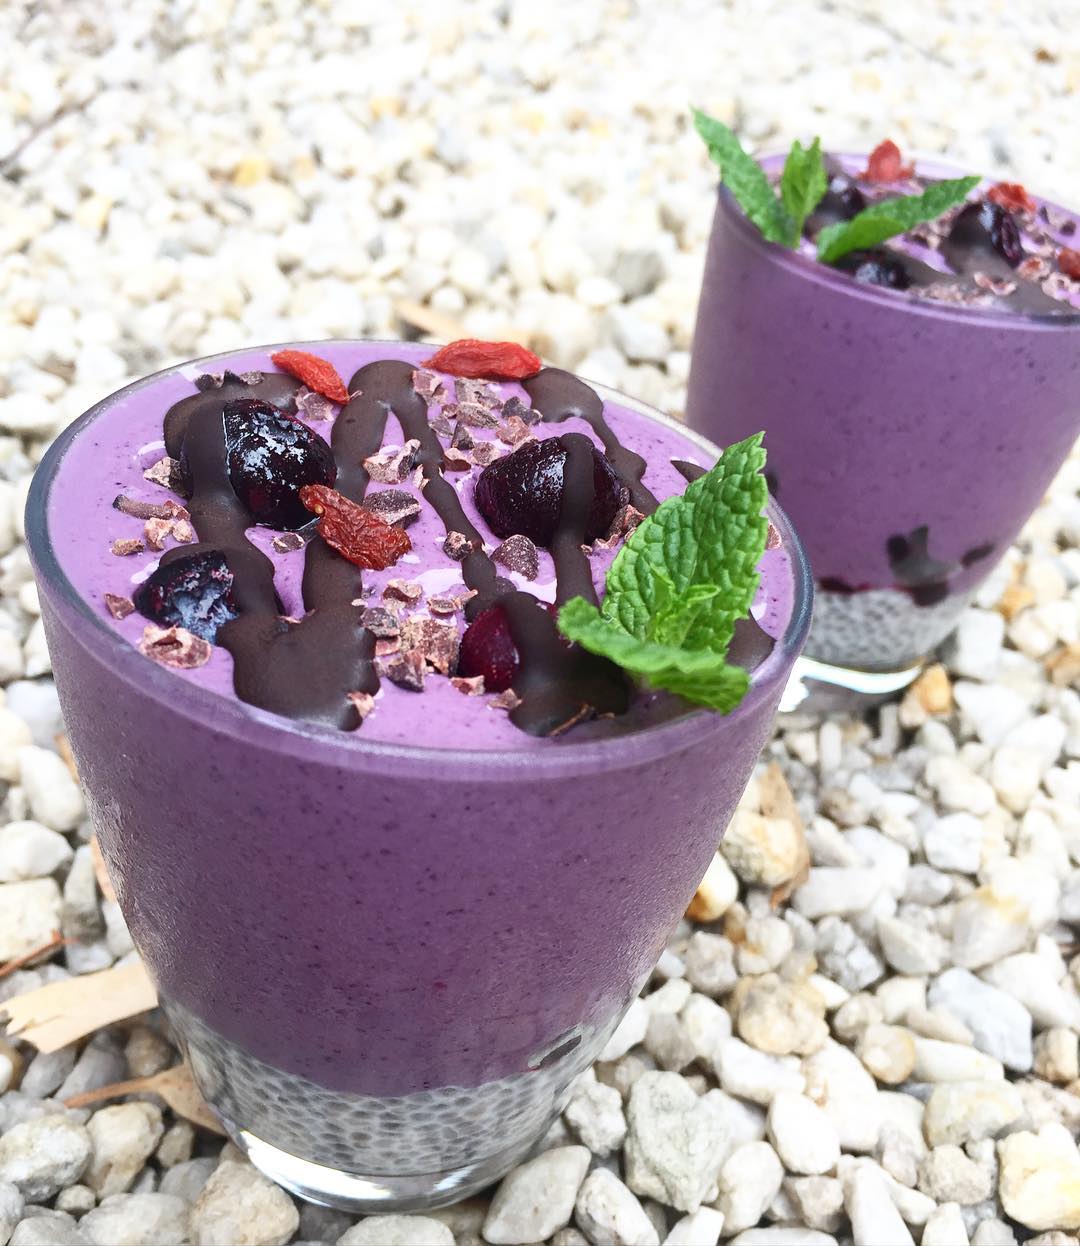 Blueberry-Buckwheat Chia Parfait Drizzled with Raw Chocolate and Cacao Nibs